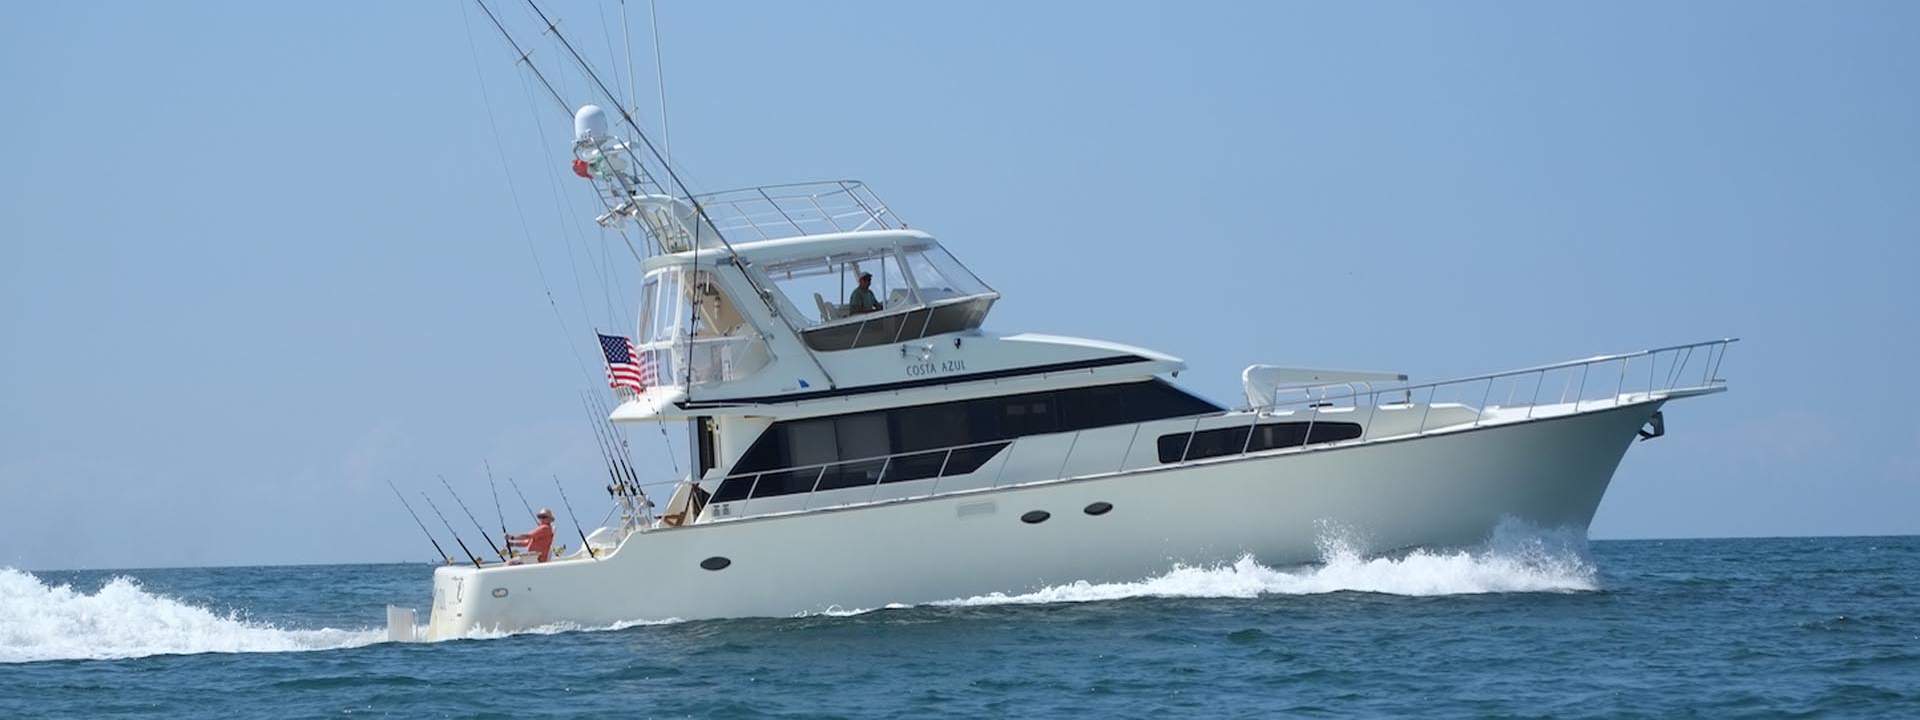 Mikelson Yachts